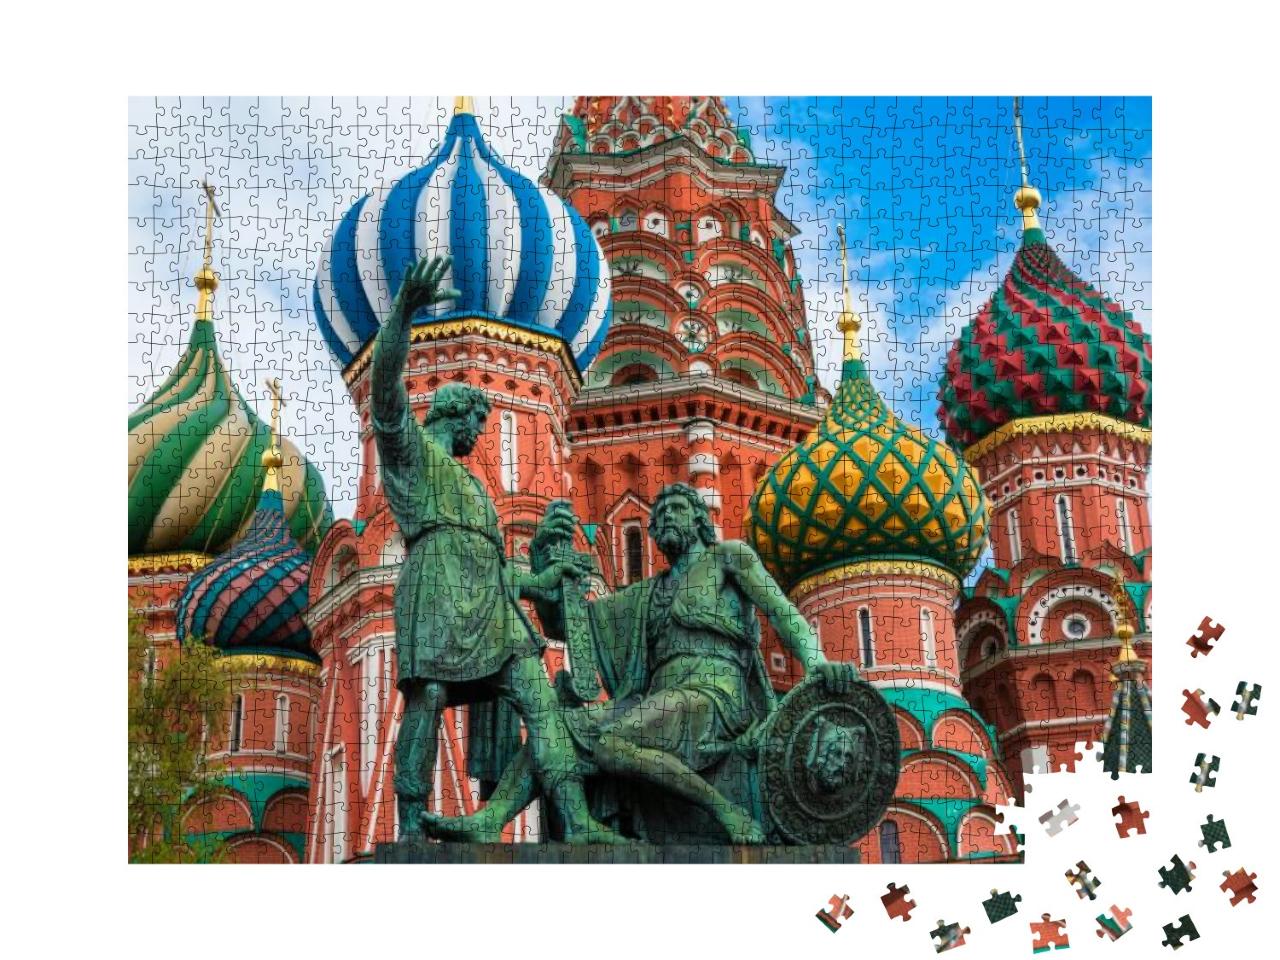 St. Basils Cathedral on Red Square in Moscow, Russia... Jigsaw Puzzle with 1000 pieces